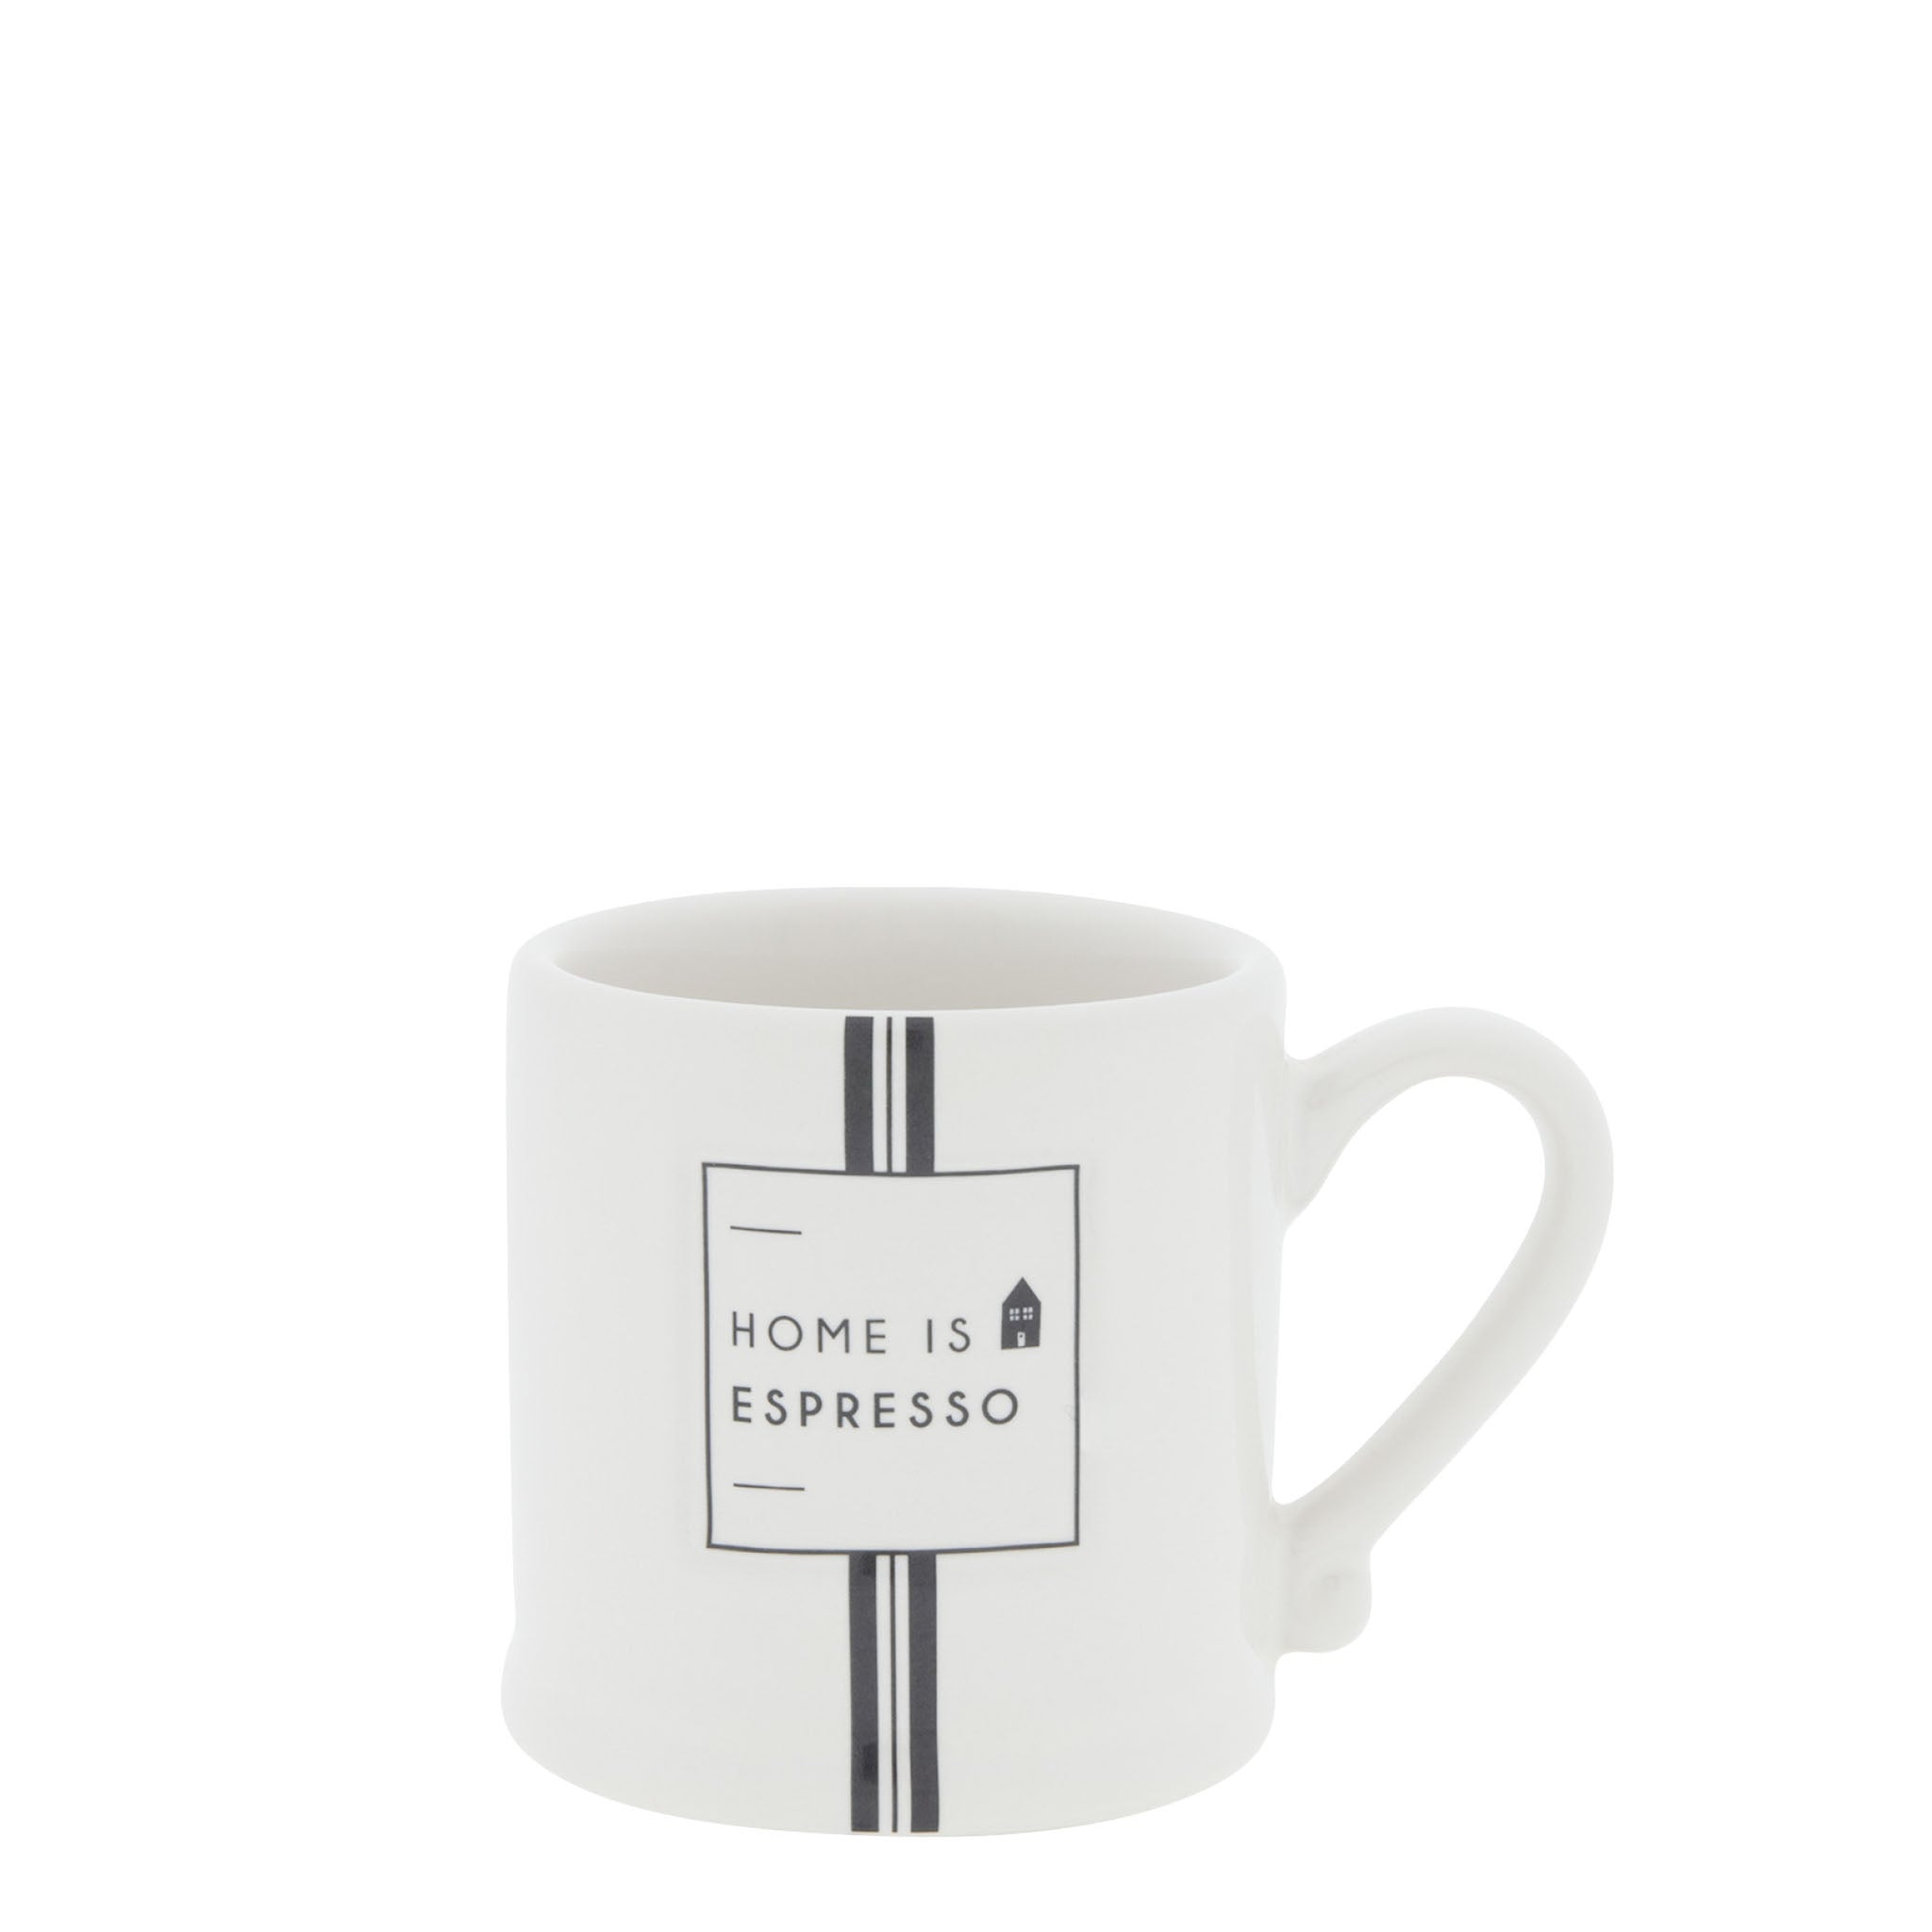 "Home is Espresso" Coffee Cup